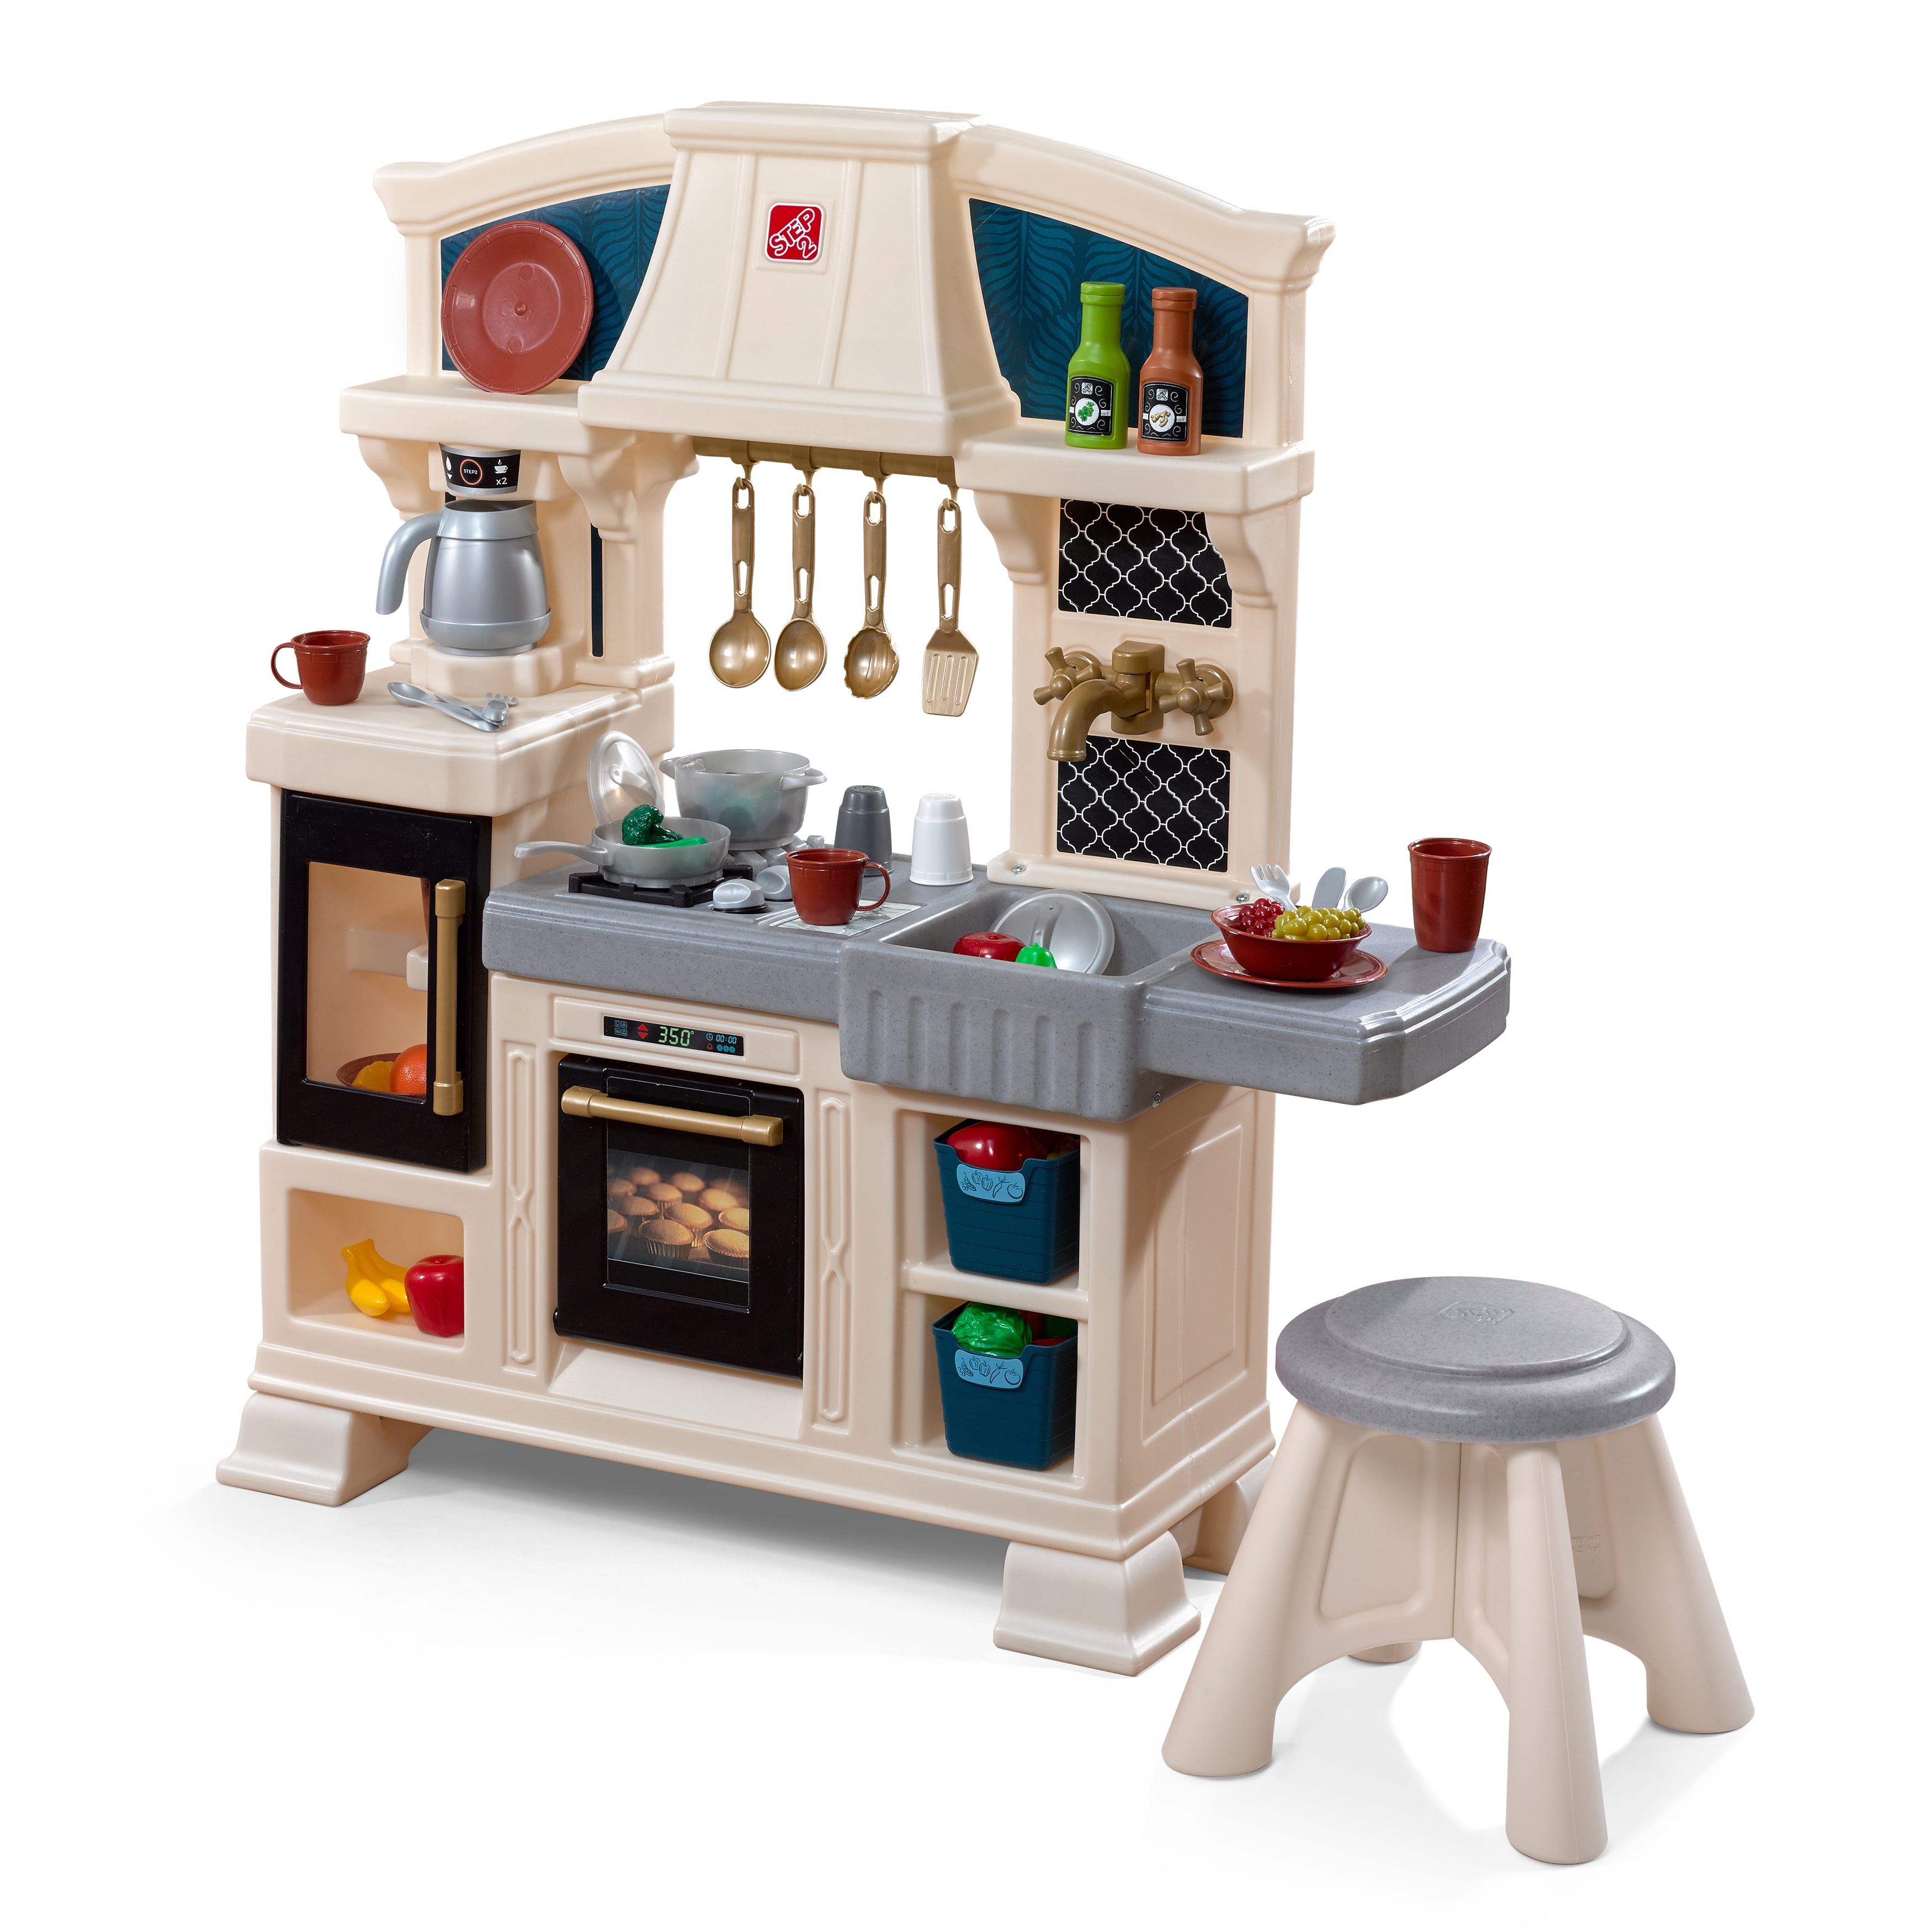 Tan Christmas Gift Step2 899399 Espresso Bar Play Kitchen for Kids 